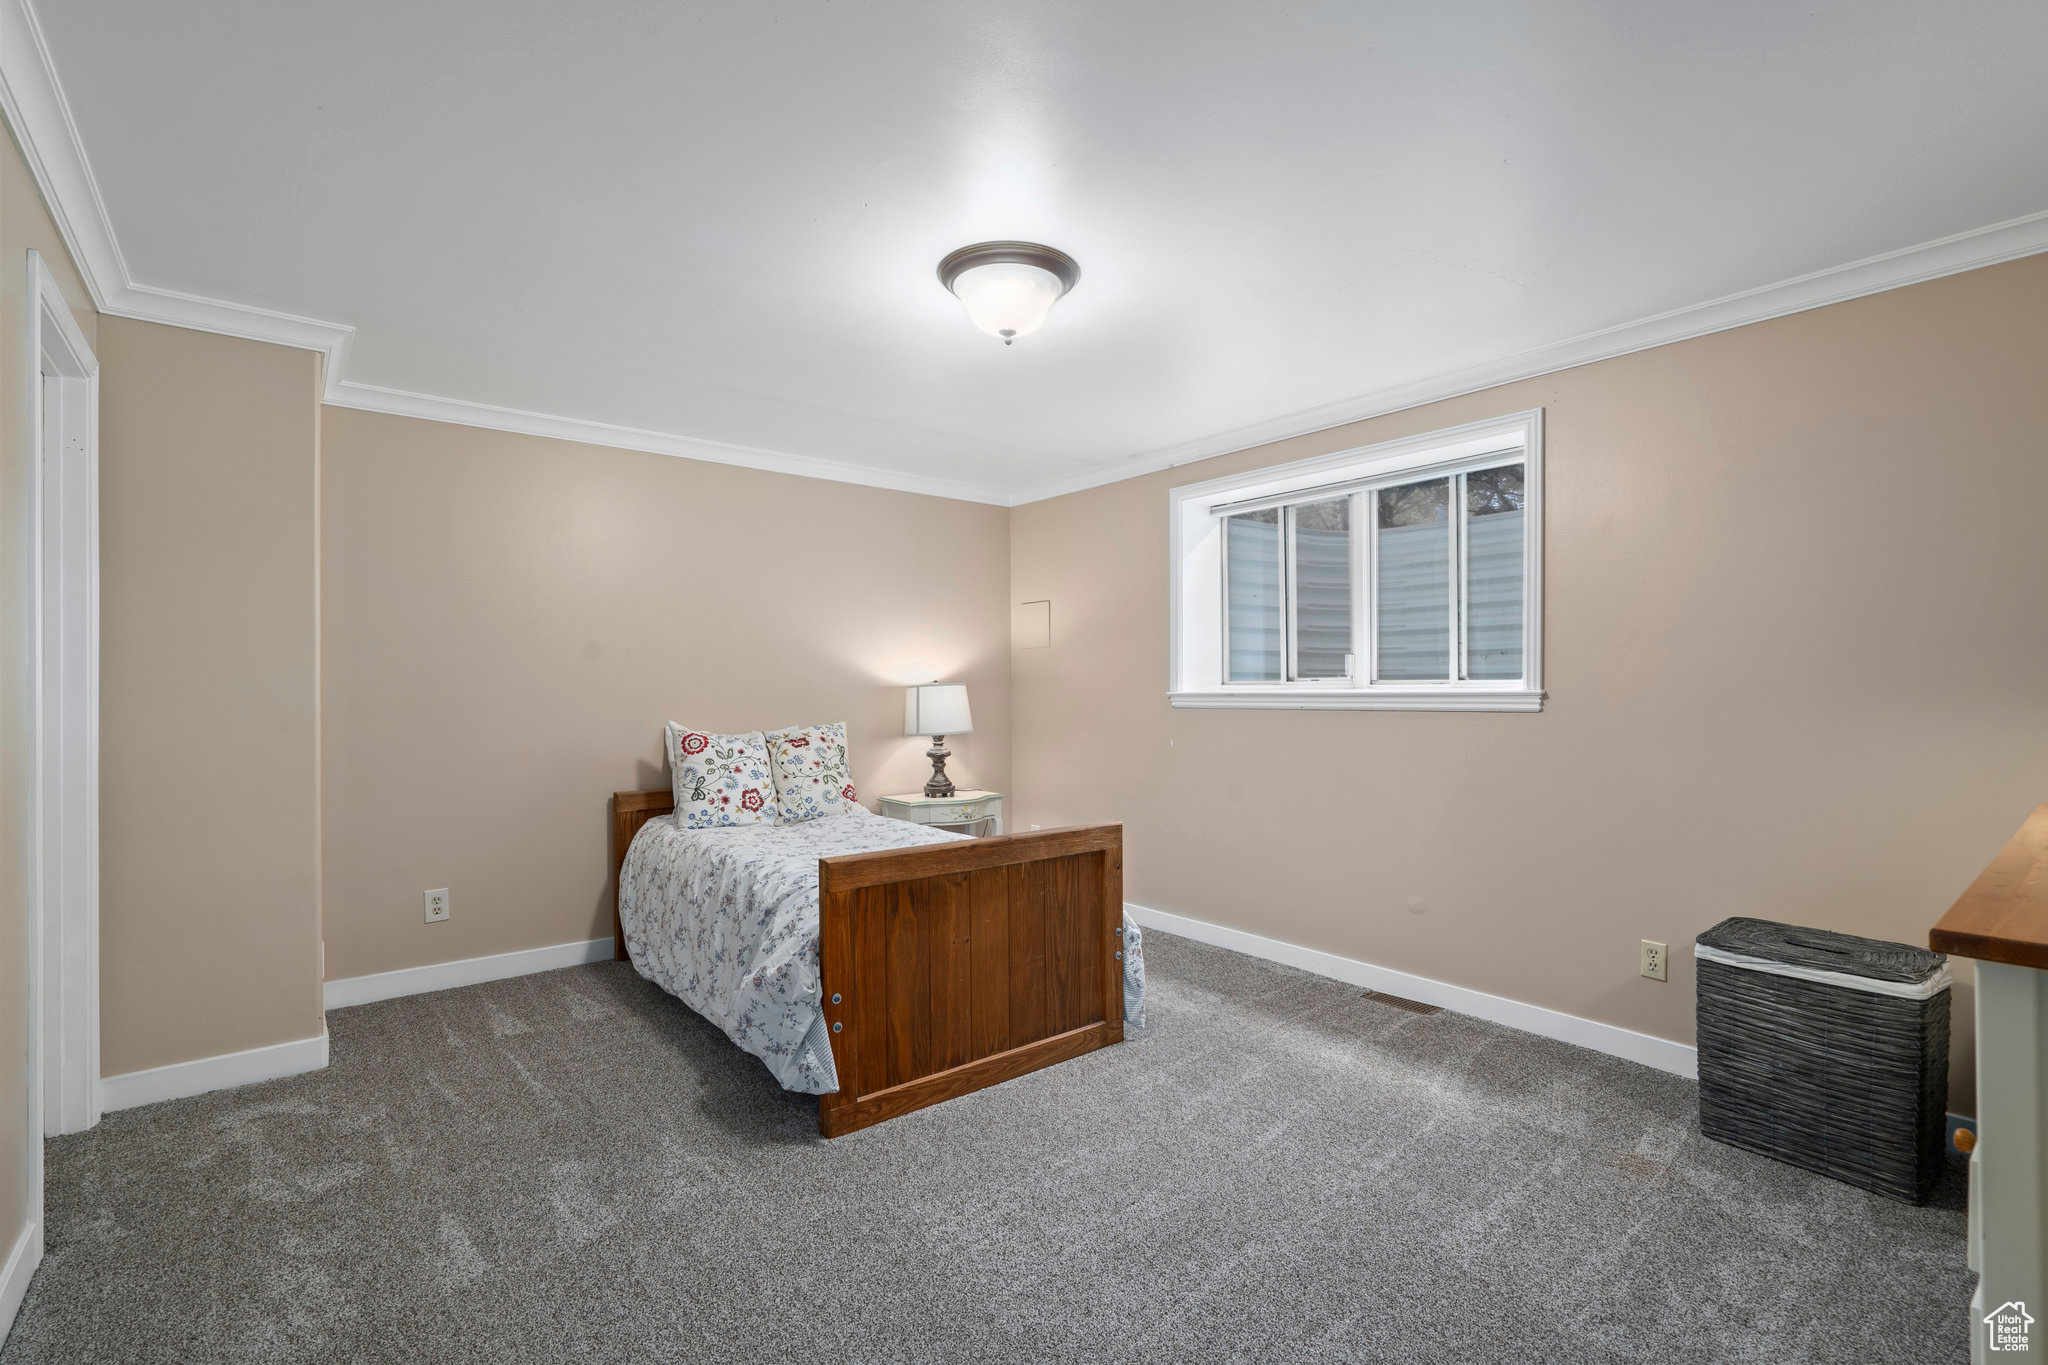 First bedroom with ornamental molding and dark carpet in the basement and two walk-in closets.